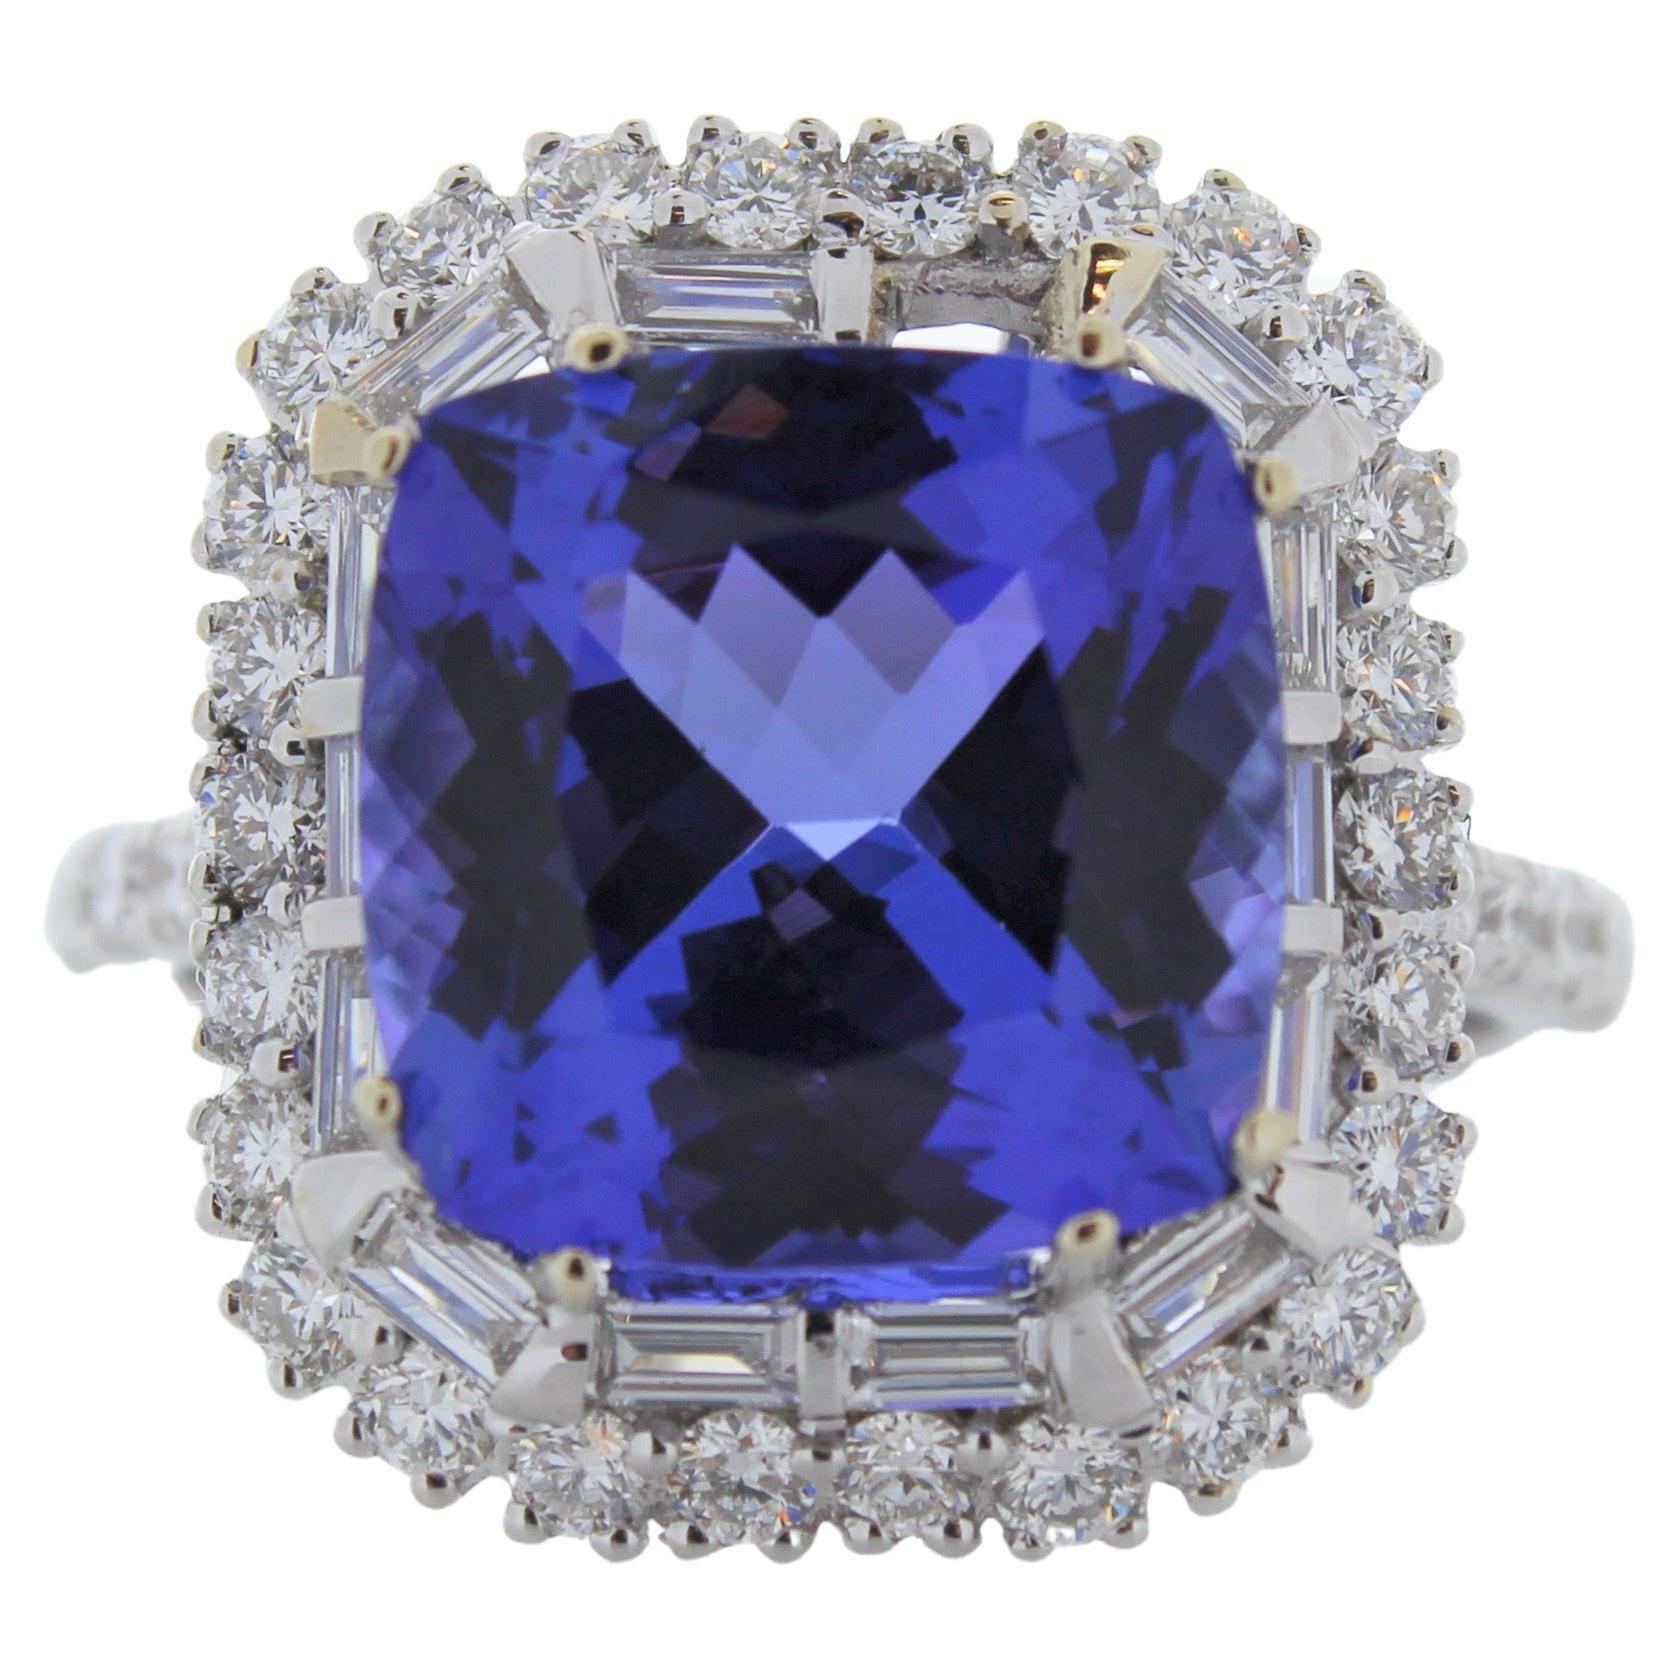 6.09 Carat Cushion Cut Tanzanite and Diamond Ring in 18K White Gold For Sale